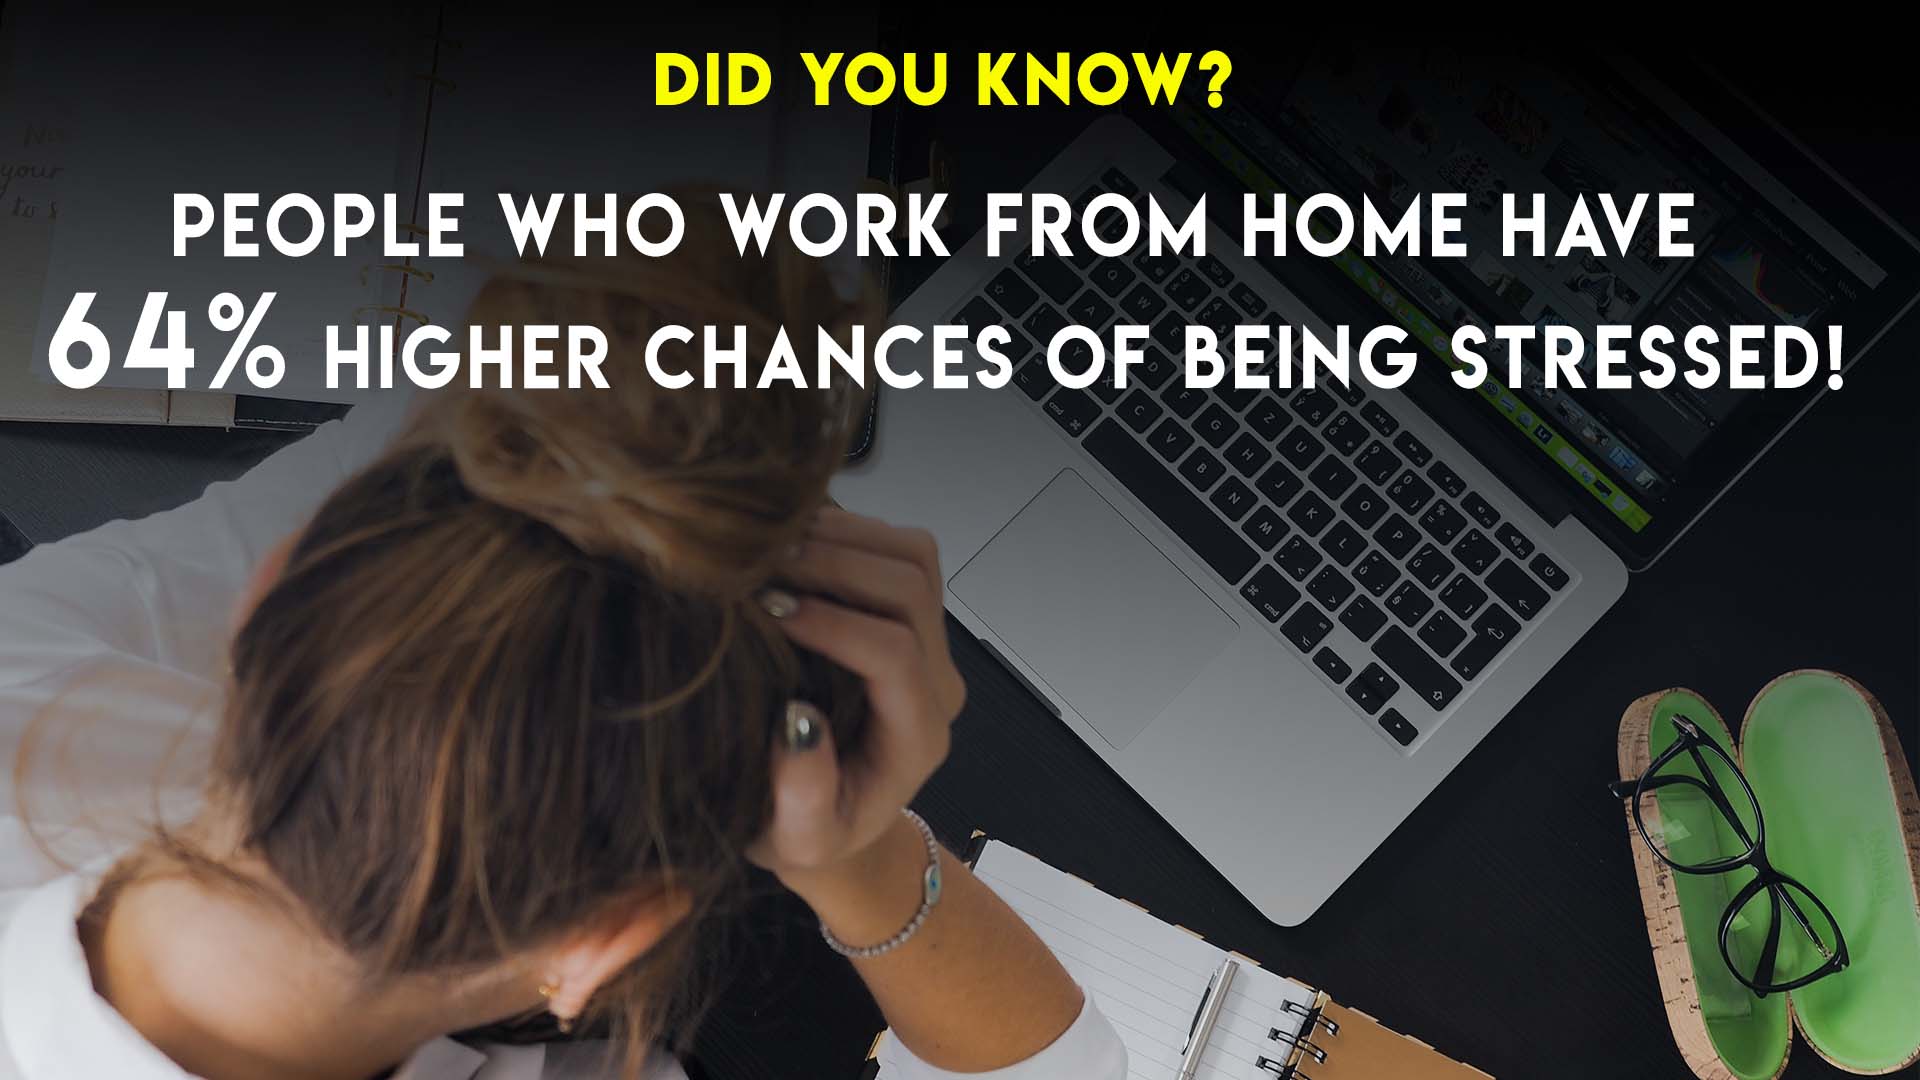 Reduce Work From Home stress